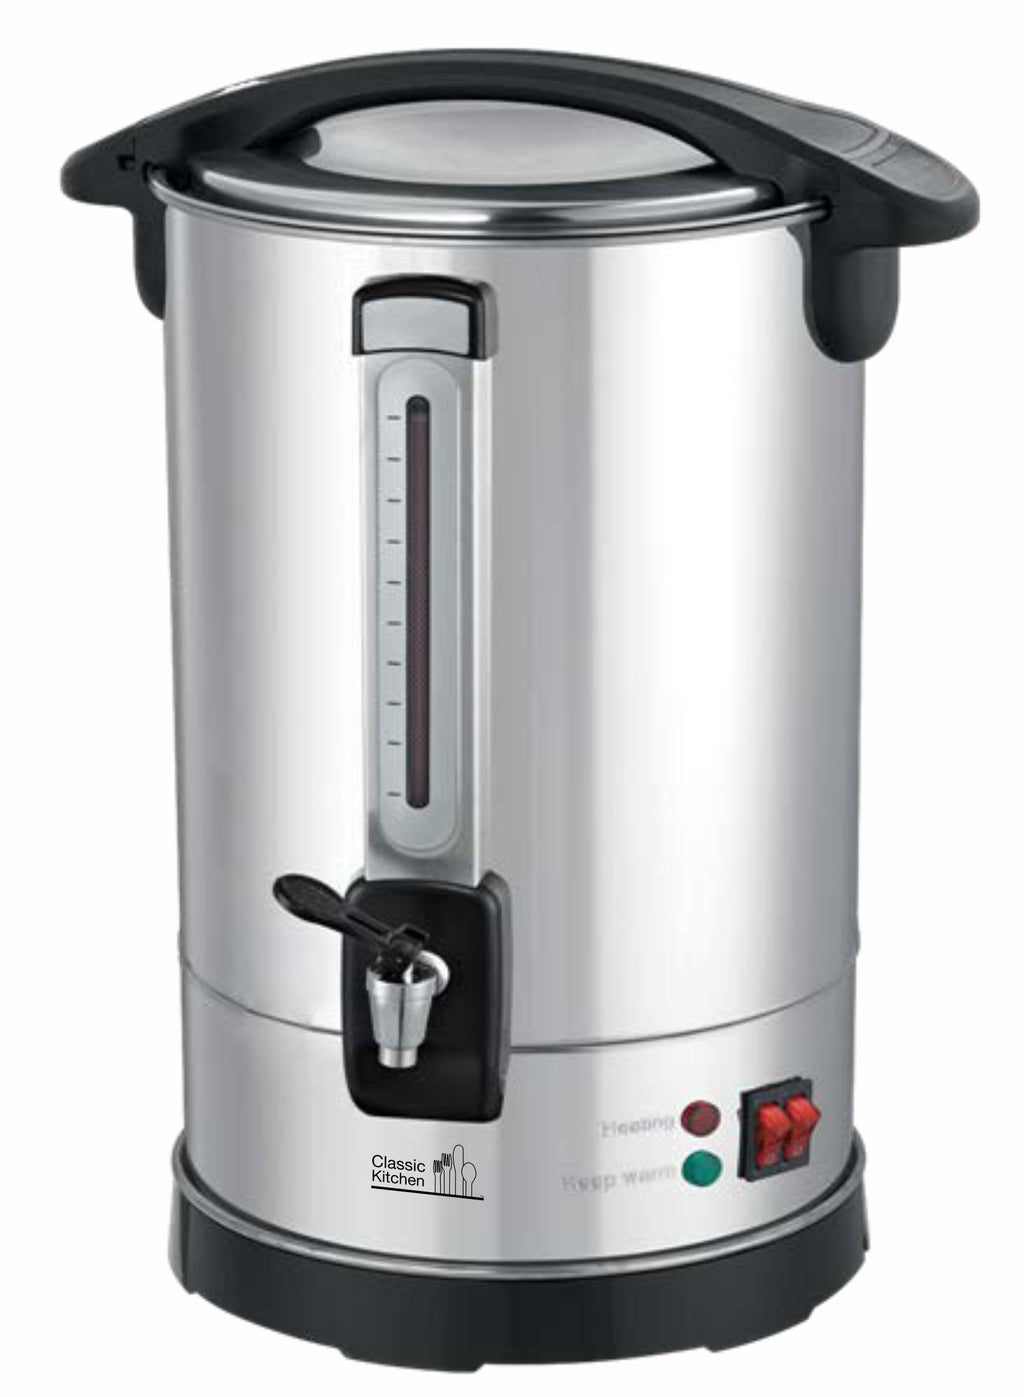 The Best Hot Water Urn for Shabbos - Jewish Moms & Crafters